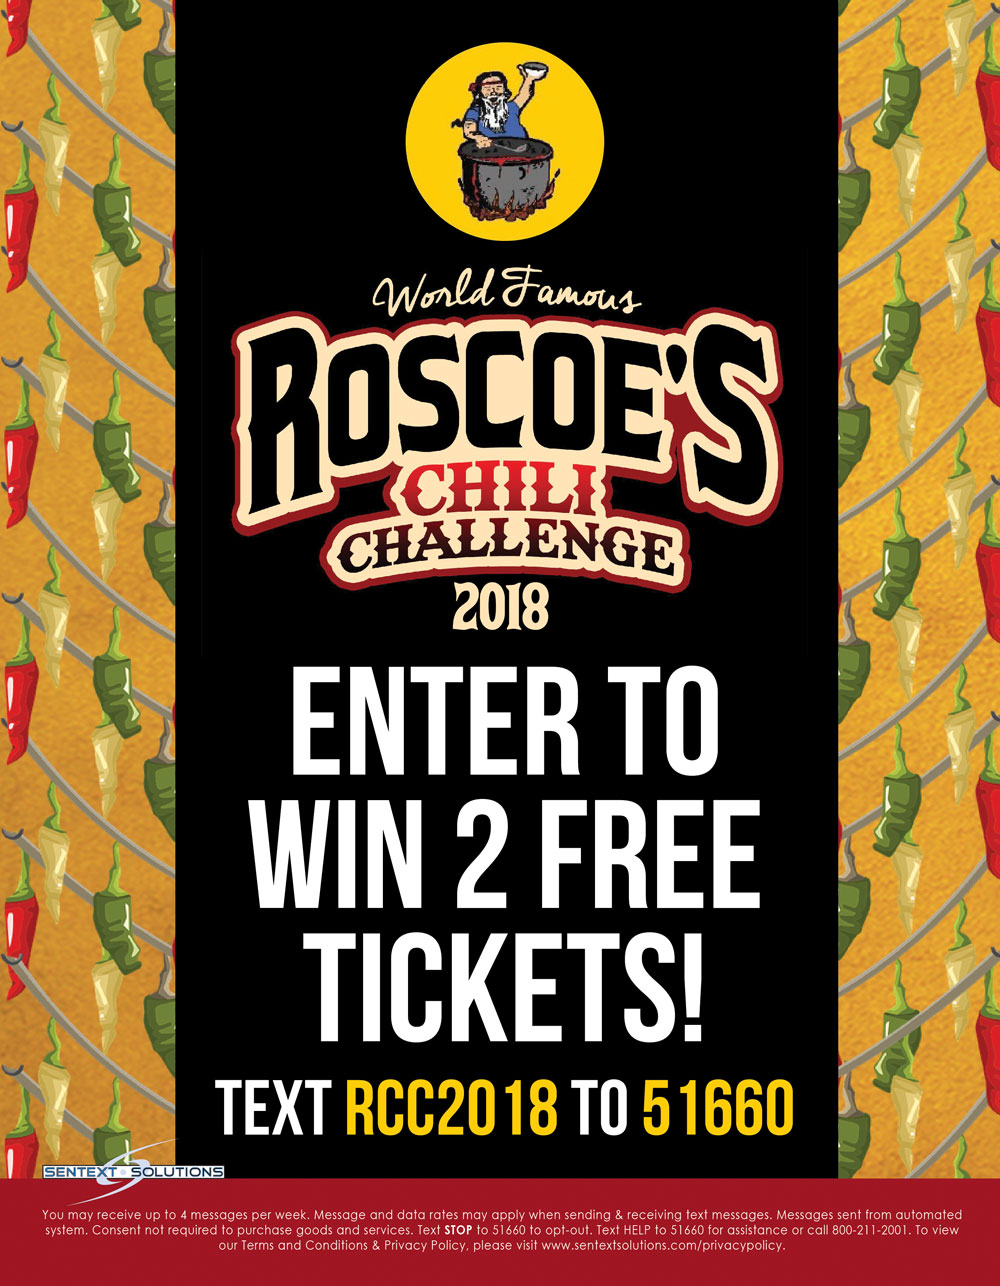 Text Promotions Rosoce's Chili Challenge RCC